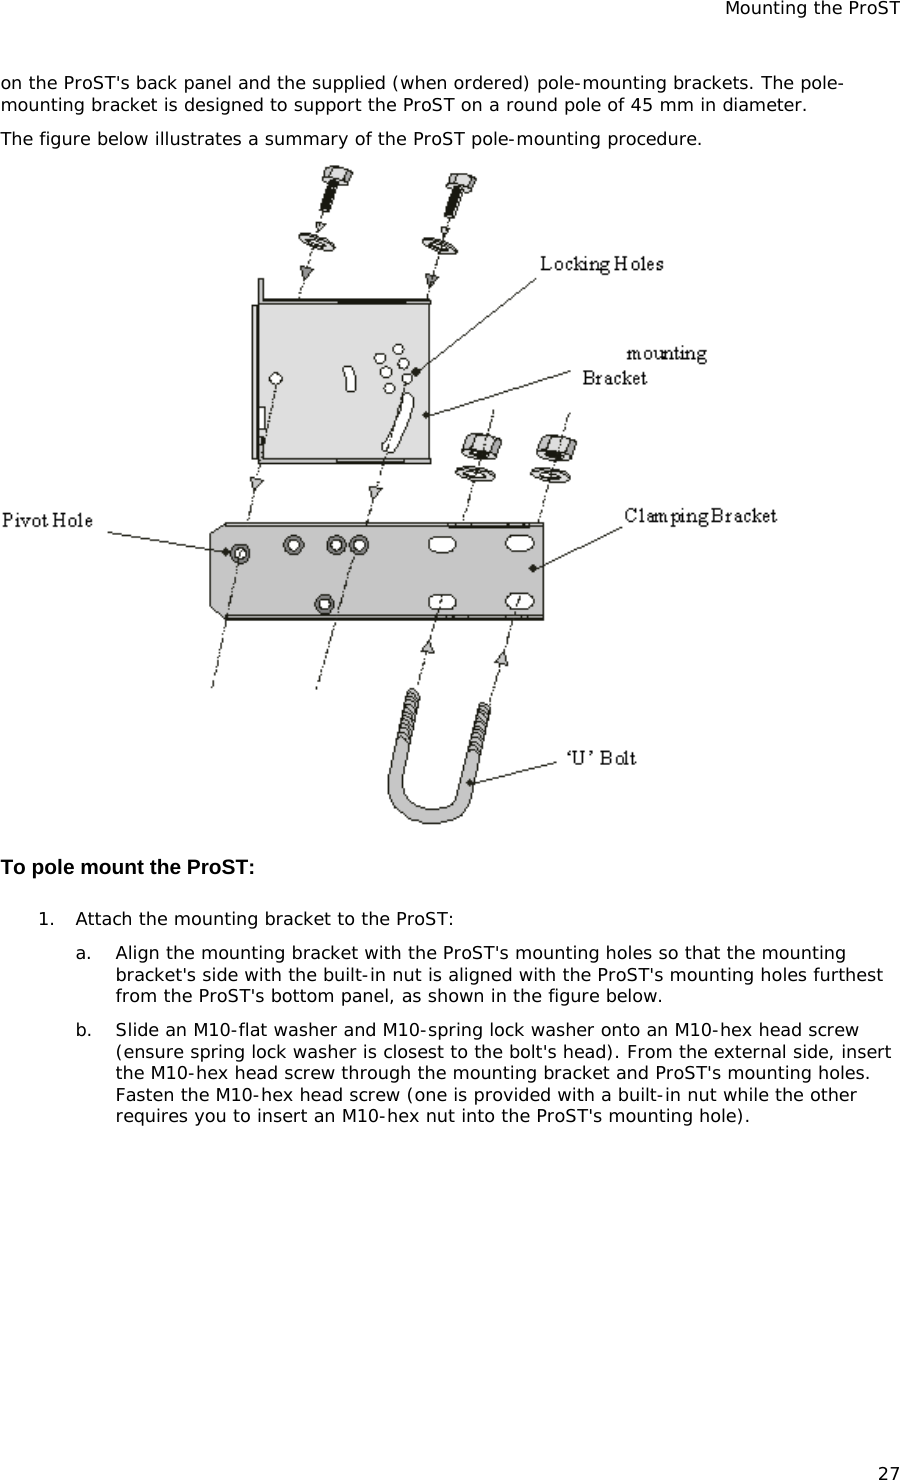 Mounting the ProST 27 on the ProST&apos;s back panel and the supplied (when ordered) pole-mounting brackets. The pole-mounting bracket is designed to support the ProST on a round pole of 45 mm in diameter. The figure below illustrates a summary of the ProST pole-mounting procedure.   To pole mount the ProST: 1. Attach the mounting bracket to the ProST: a. Align the mounting bracket with the ProST&apos;s mounting holes so that the mounting bracket&apos;s side with the built-in nut is aligned with the ProST&apos;s mounting holes furthest from the ProST&apos;s bottom panel, as shown in the figure below. b. Slide an M10-flat washer and M10-spring lock washer onto an M10-hex head screw (ensure spring lock washer is closest to the bolt&apos;s head). From the external side, insert the M10-hex head screw through the mounting bracket and ProST&apos;s mounting holes. Fasten the M10-hex head screw (one is provided with a built-in nut while the other requires you to insert an M10-hex nut into the ProST&apos;s mounting hole). 